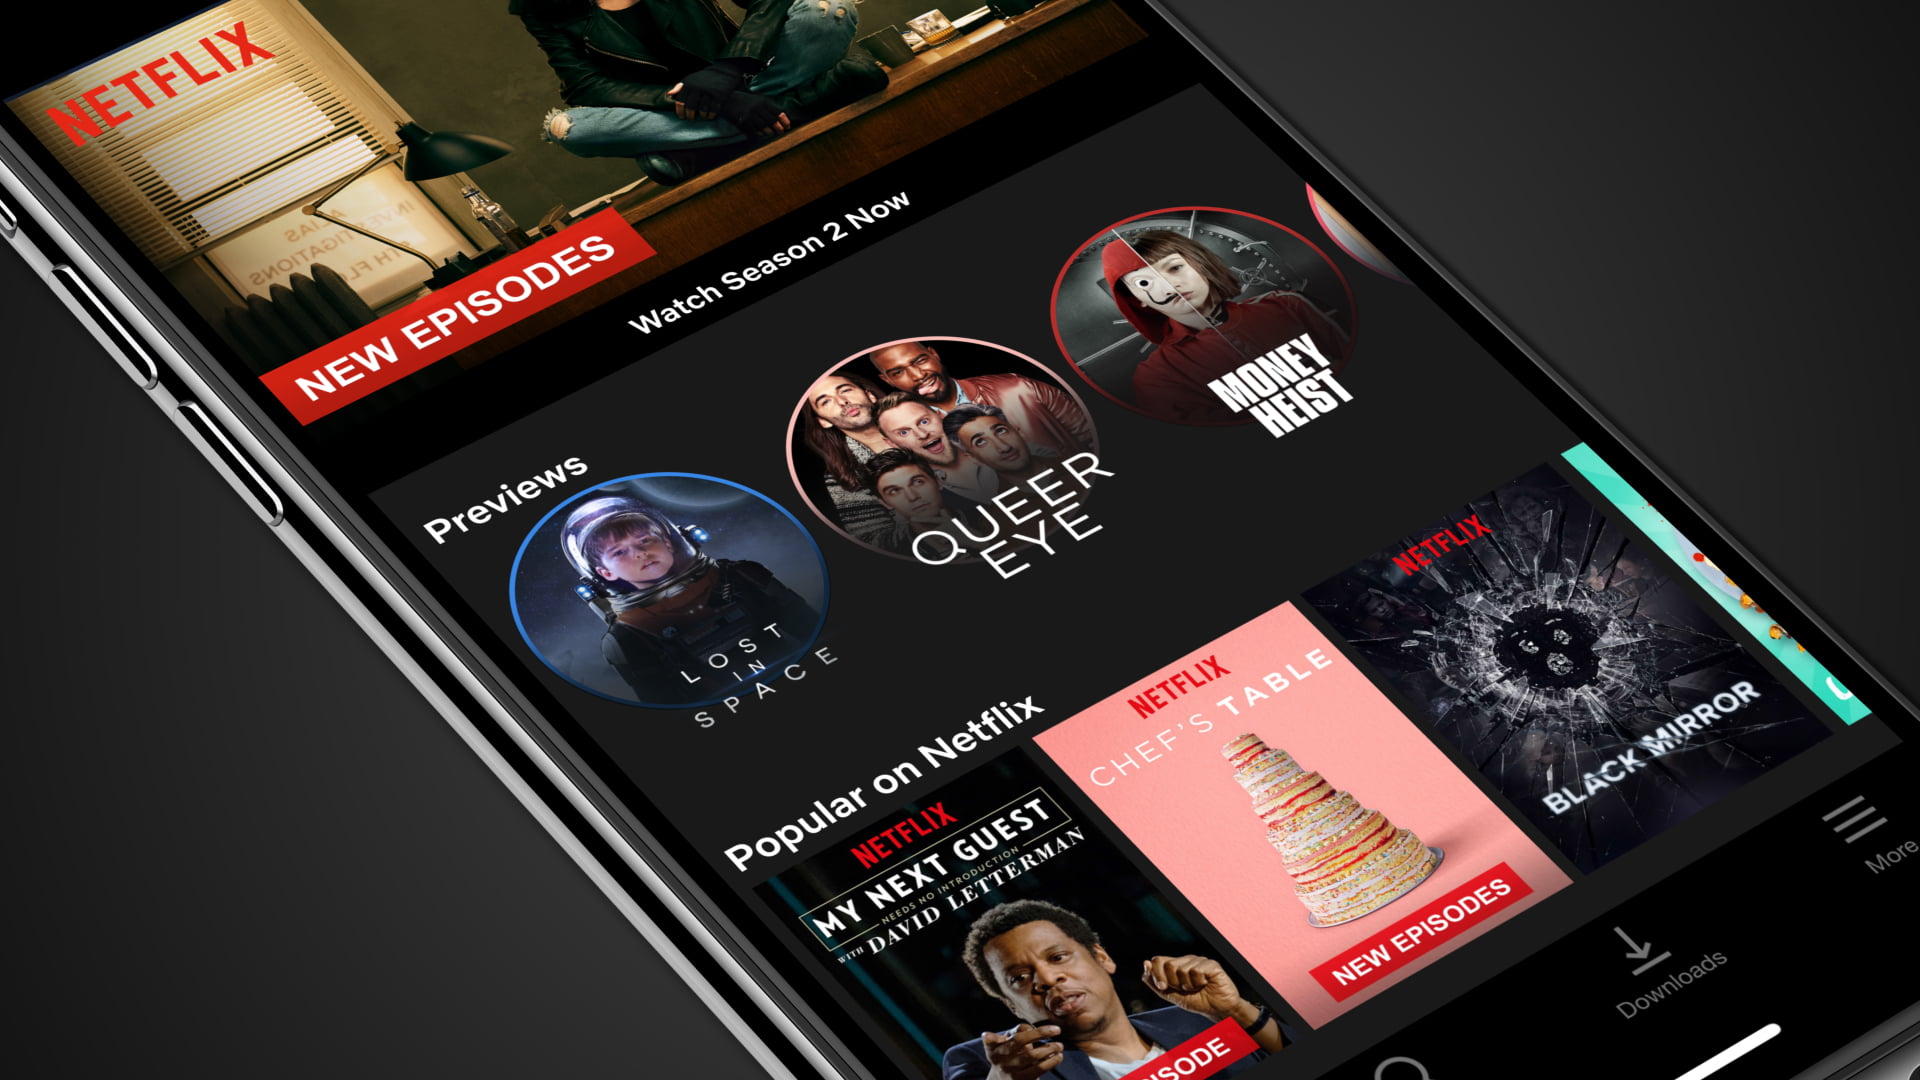 How to cancel a Netflix subscription on Android or iOS?